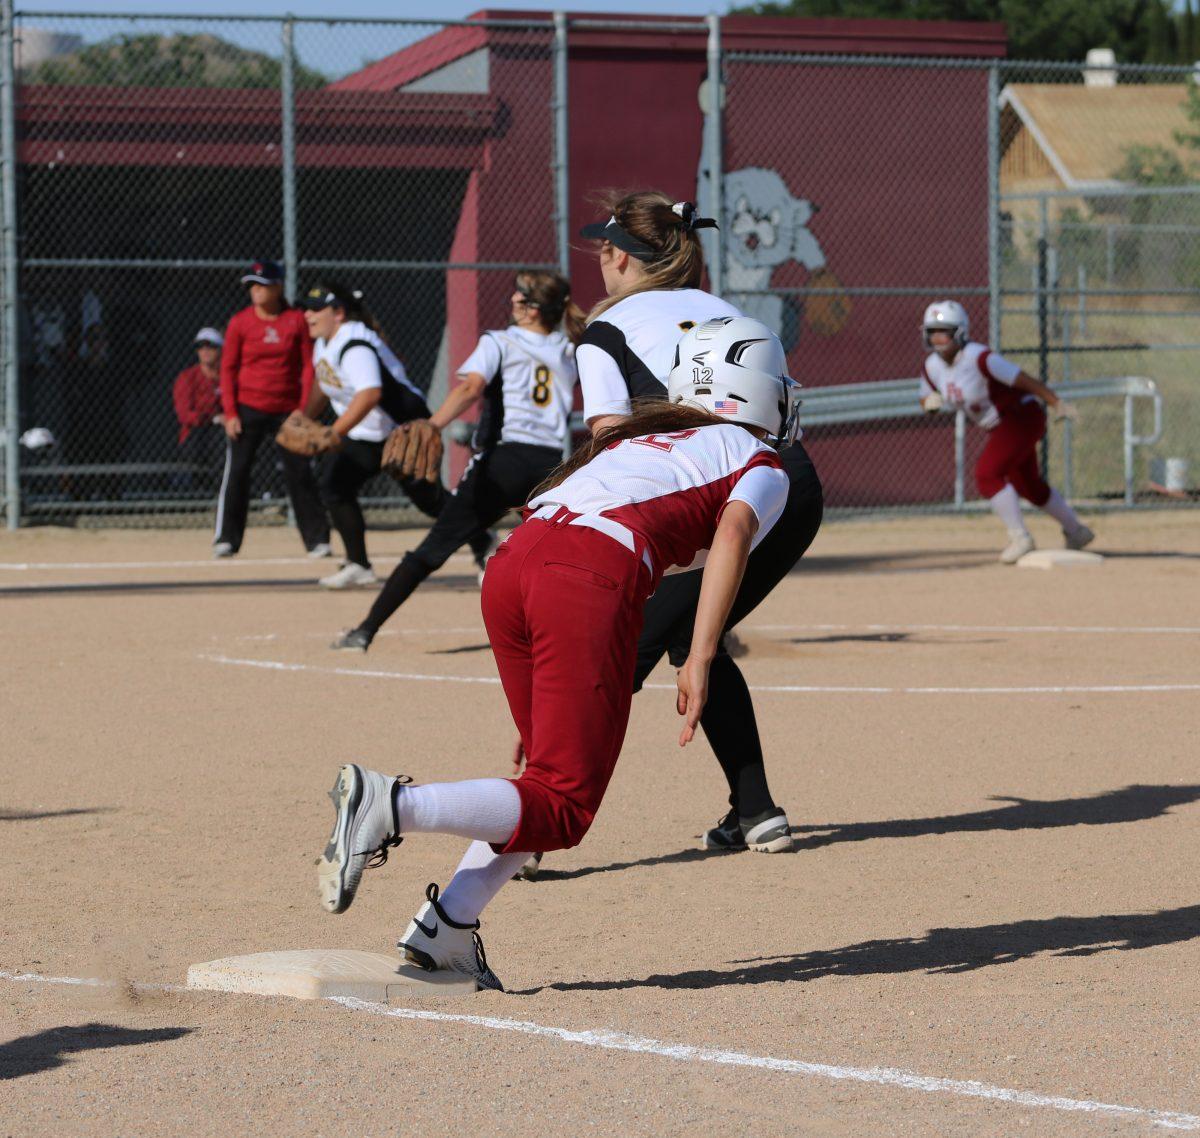 Sahara Harvey leads off to steal second base.